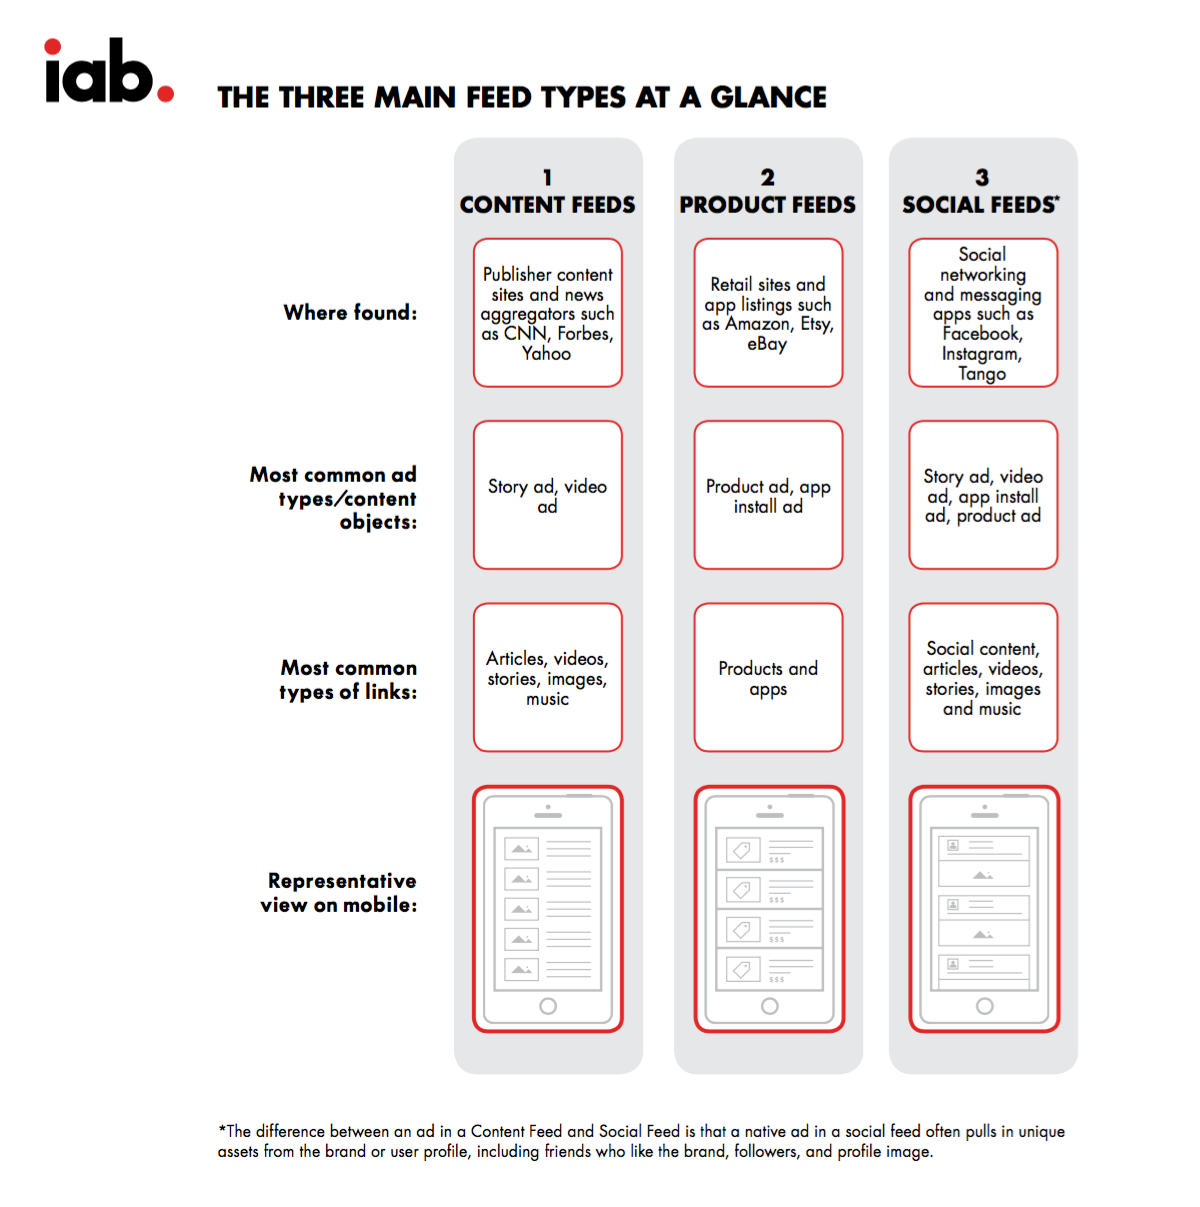 IAB in-feed ad types: content feeds, product feeds, social feeds